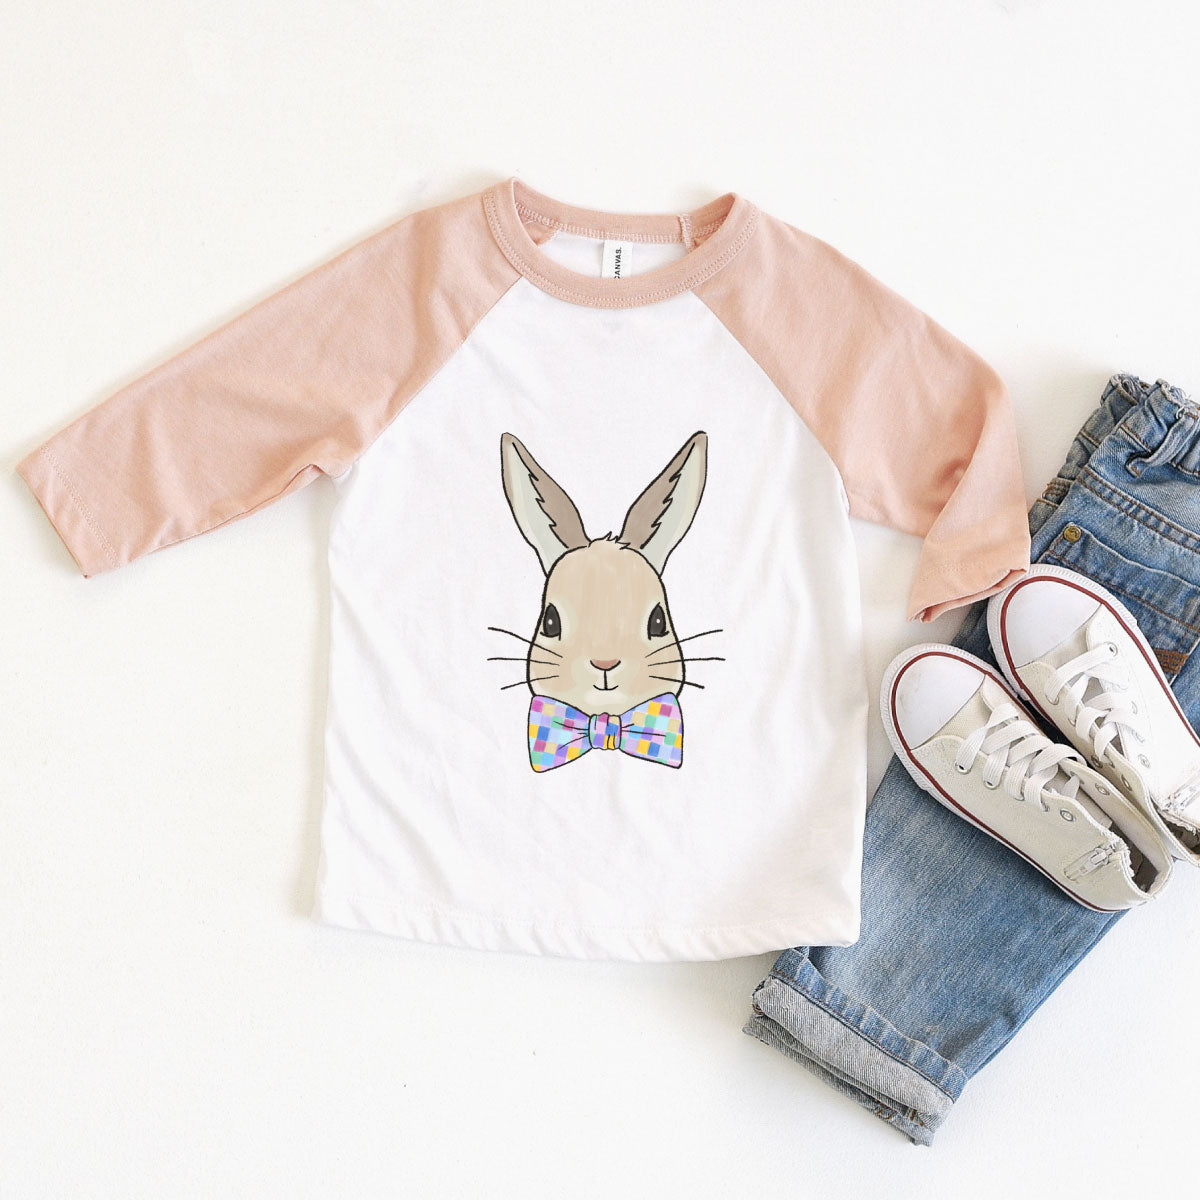 White raglan with peach sleeves and a graphic of a bunny wearing a bow tie with multicolored squares on it. 